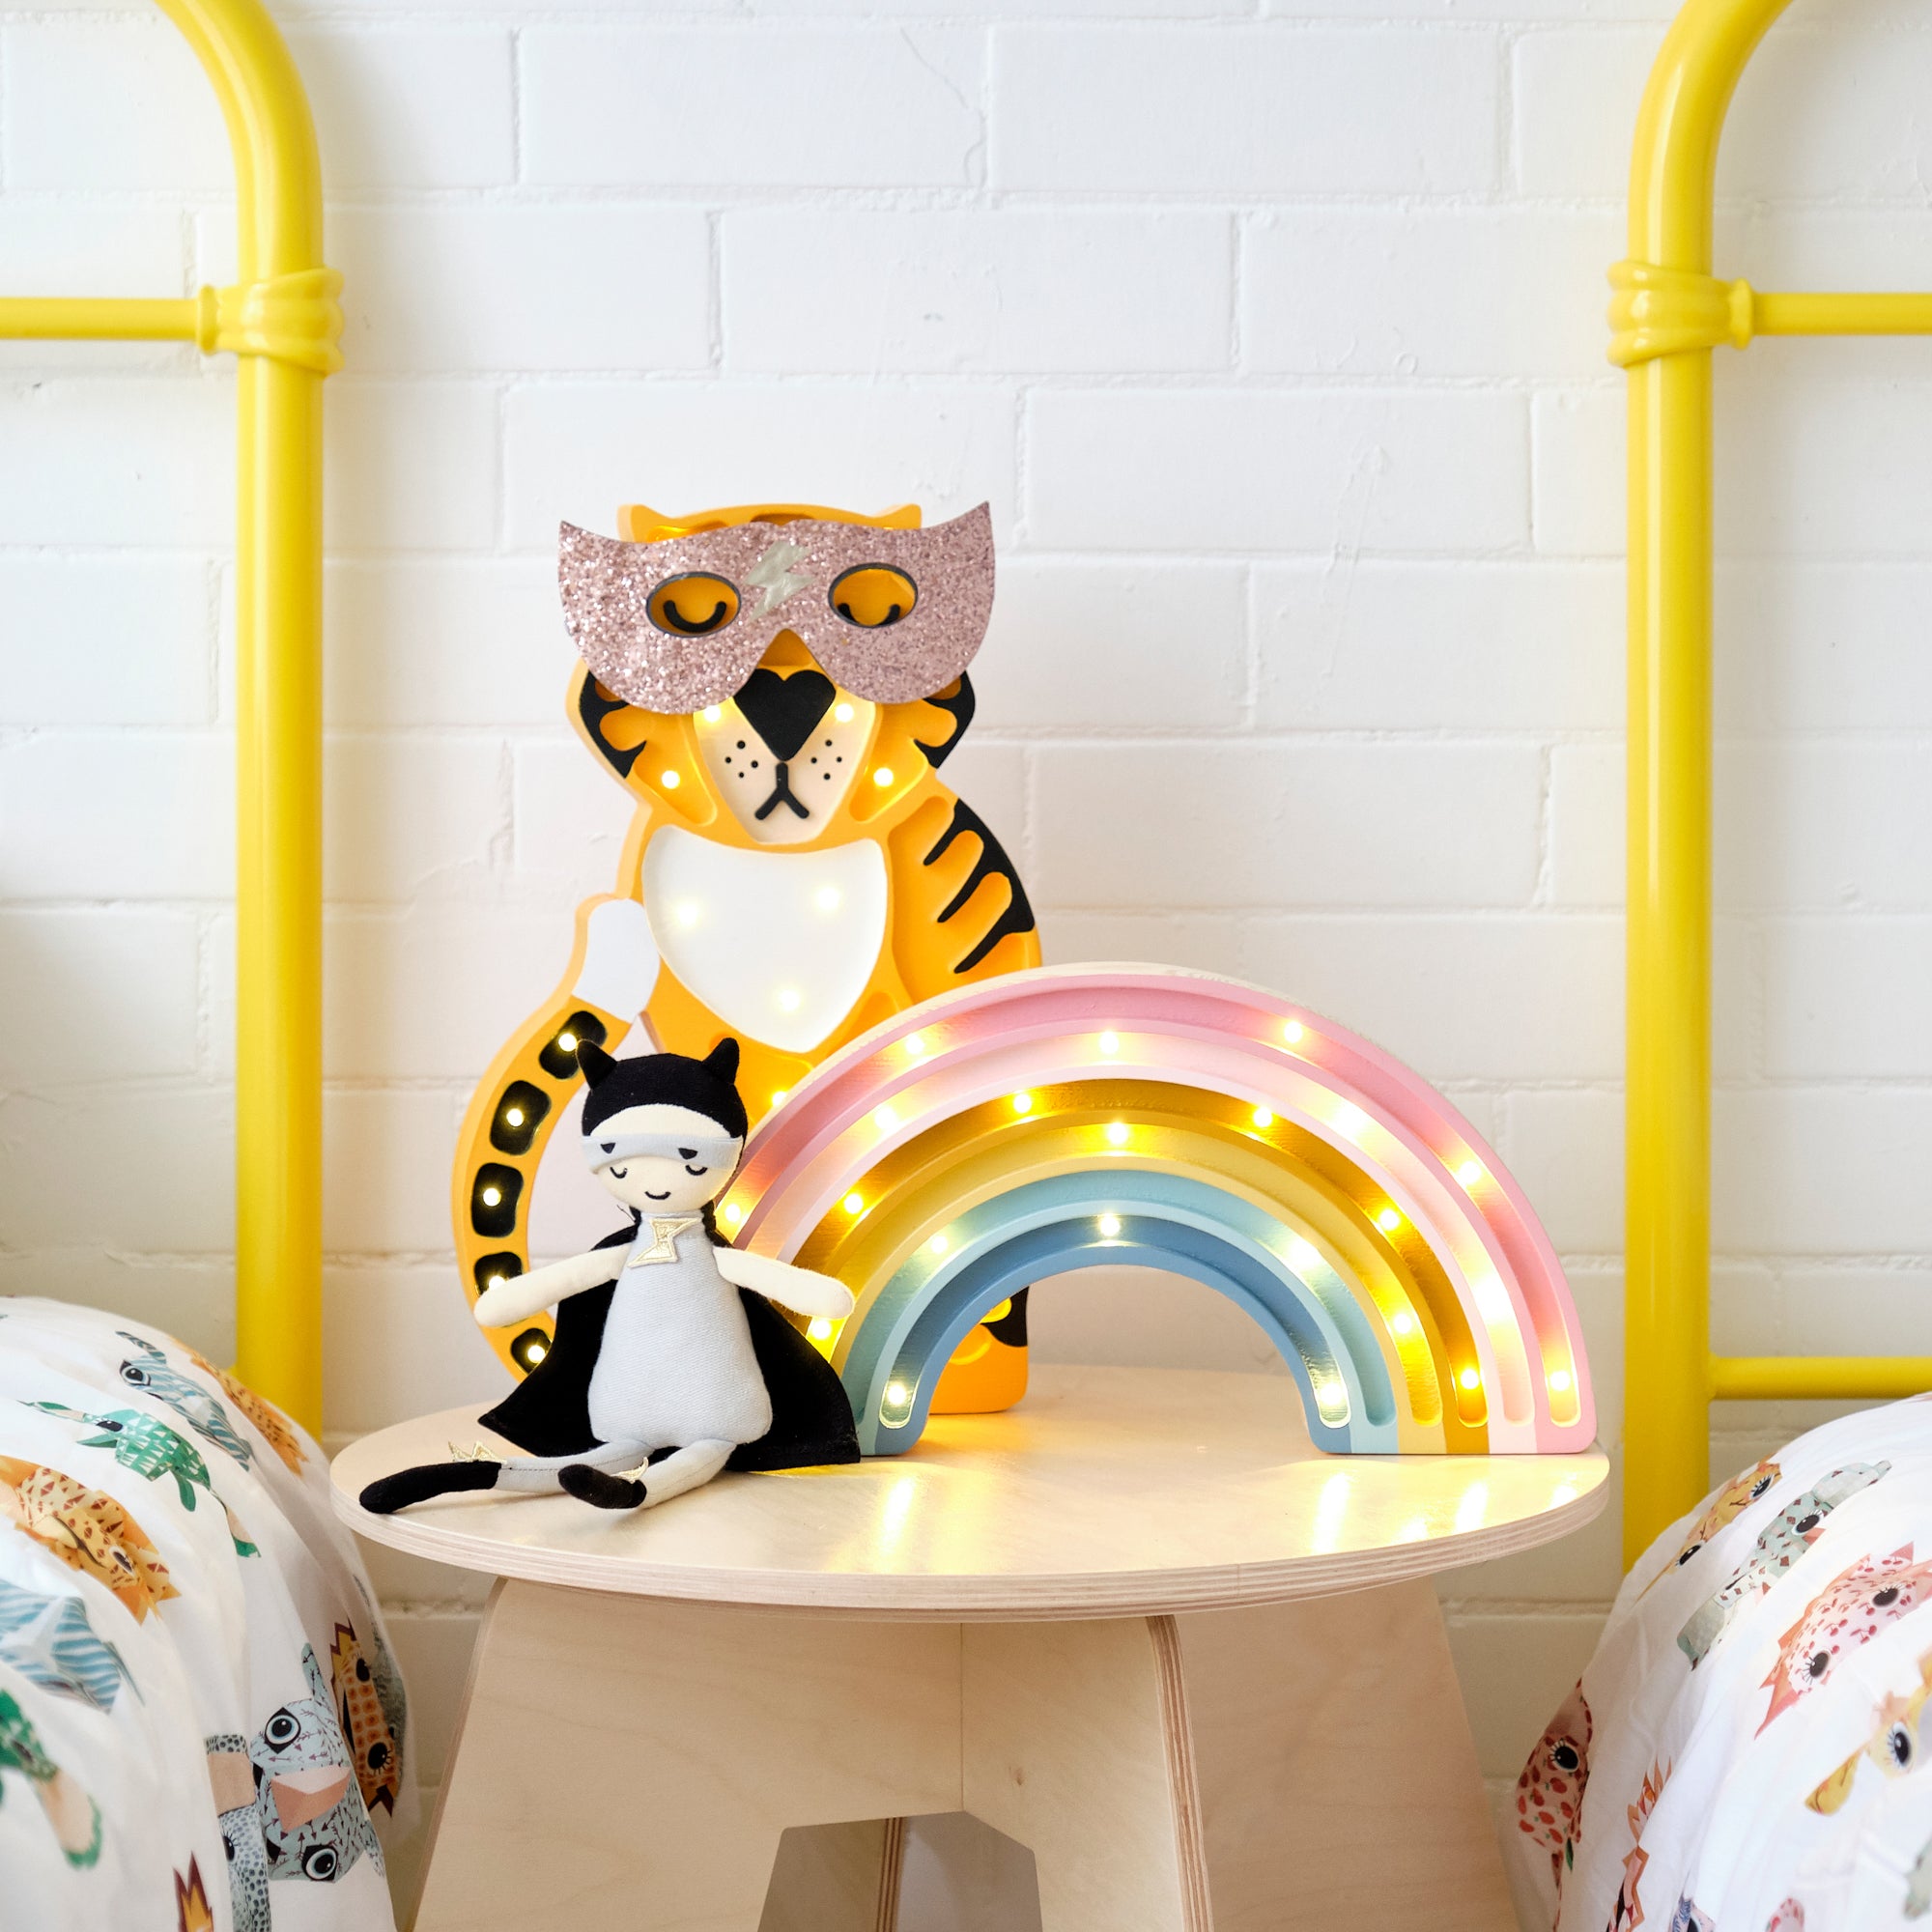 Tiger and Rainbow Lamps by Little Lights, available at Bobby Rabbit.